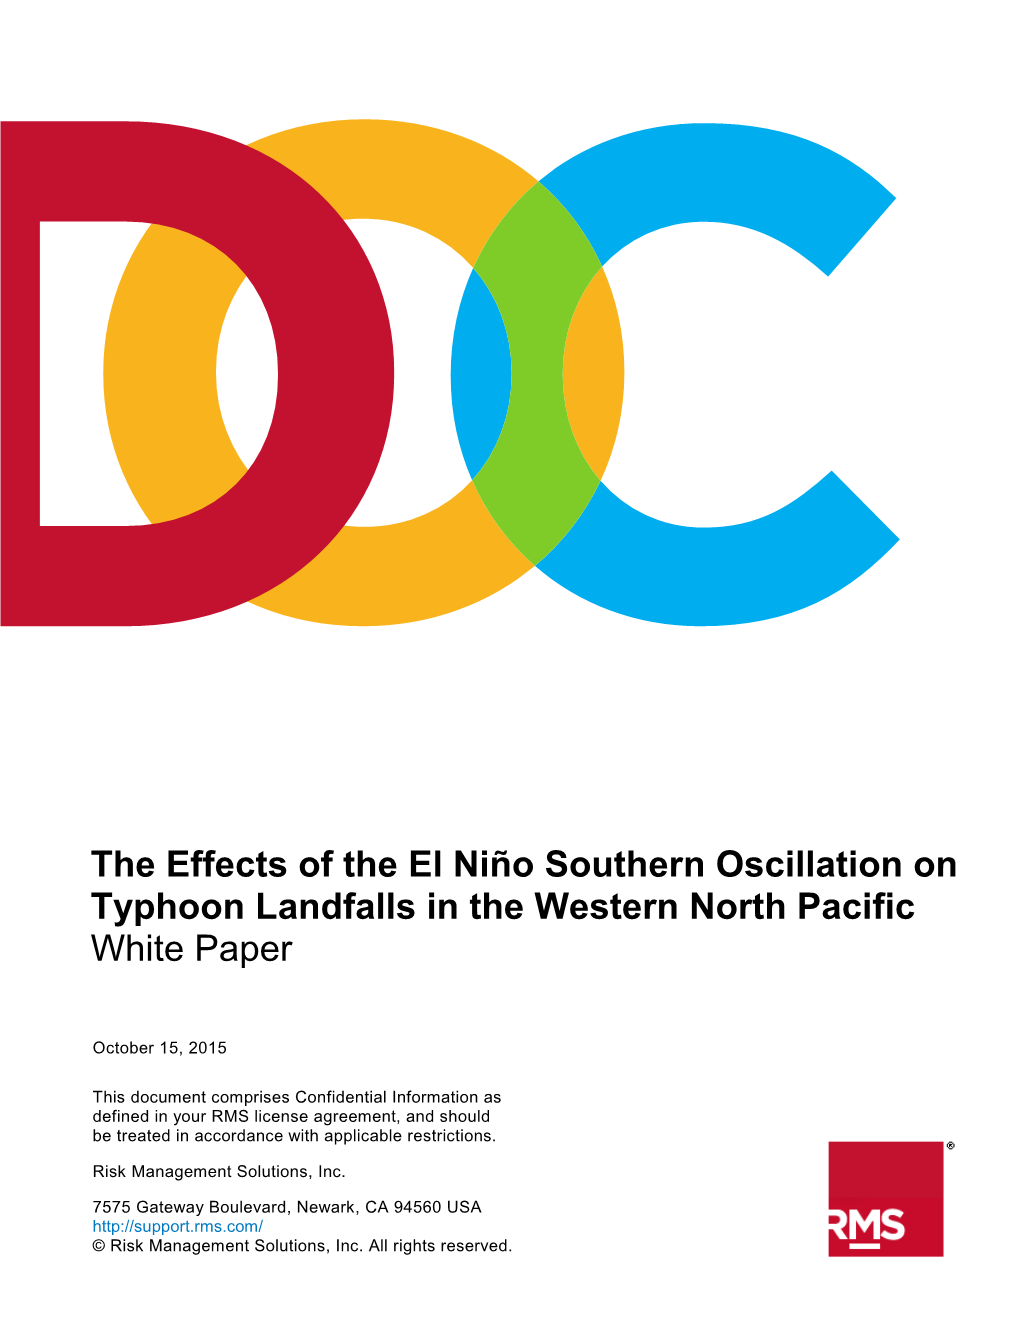 The Effects of the El Niño Southern Oscillation on Typhoon Landfalls in the Western North Pacific White Paper